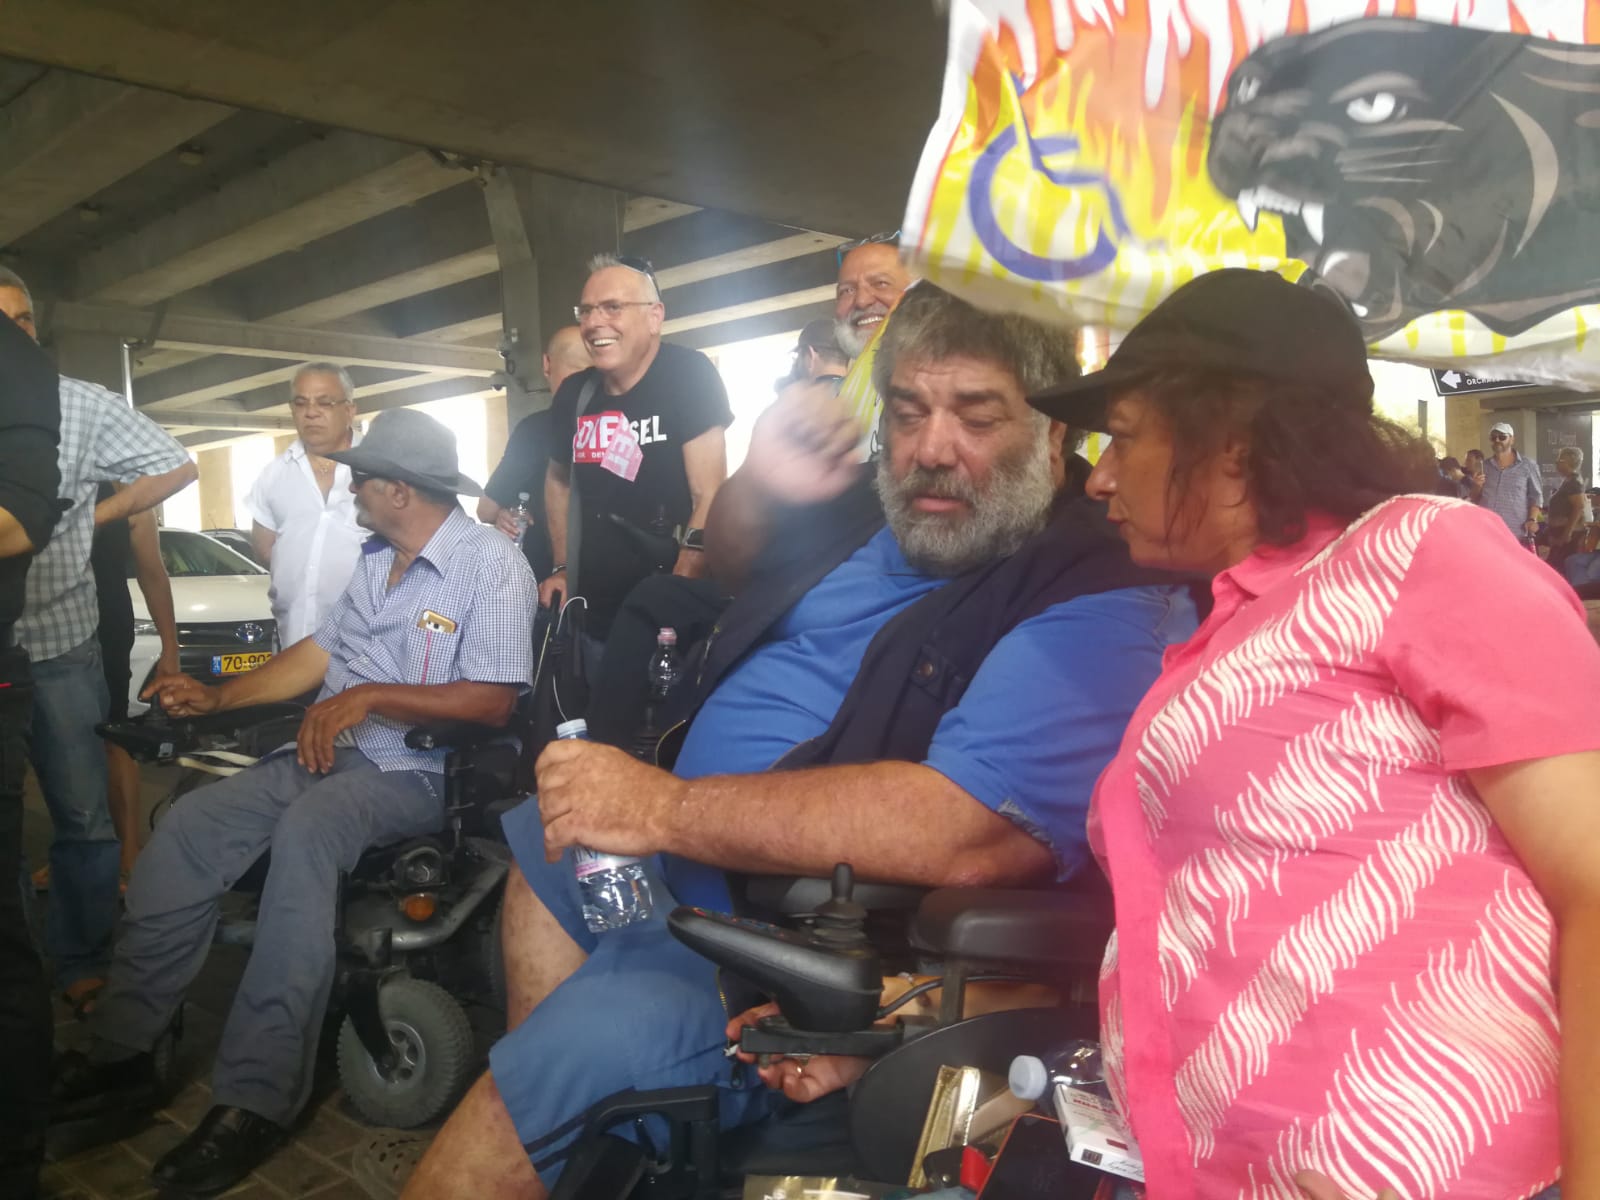 Eyal Cohen at a disability rights protest at Ben Gurion Airport, Aug, 2017 (Photograph: Naor Lavi, Disabled Become Panthers group spokesperson)